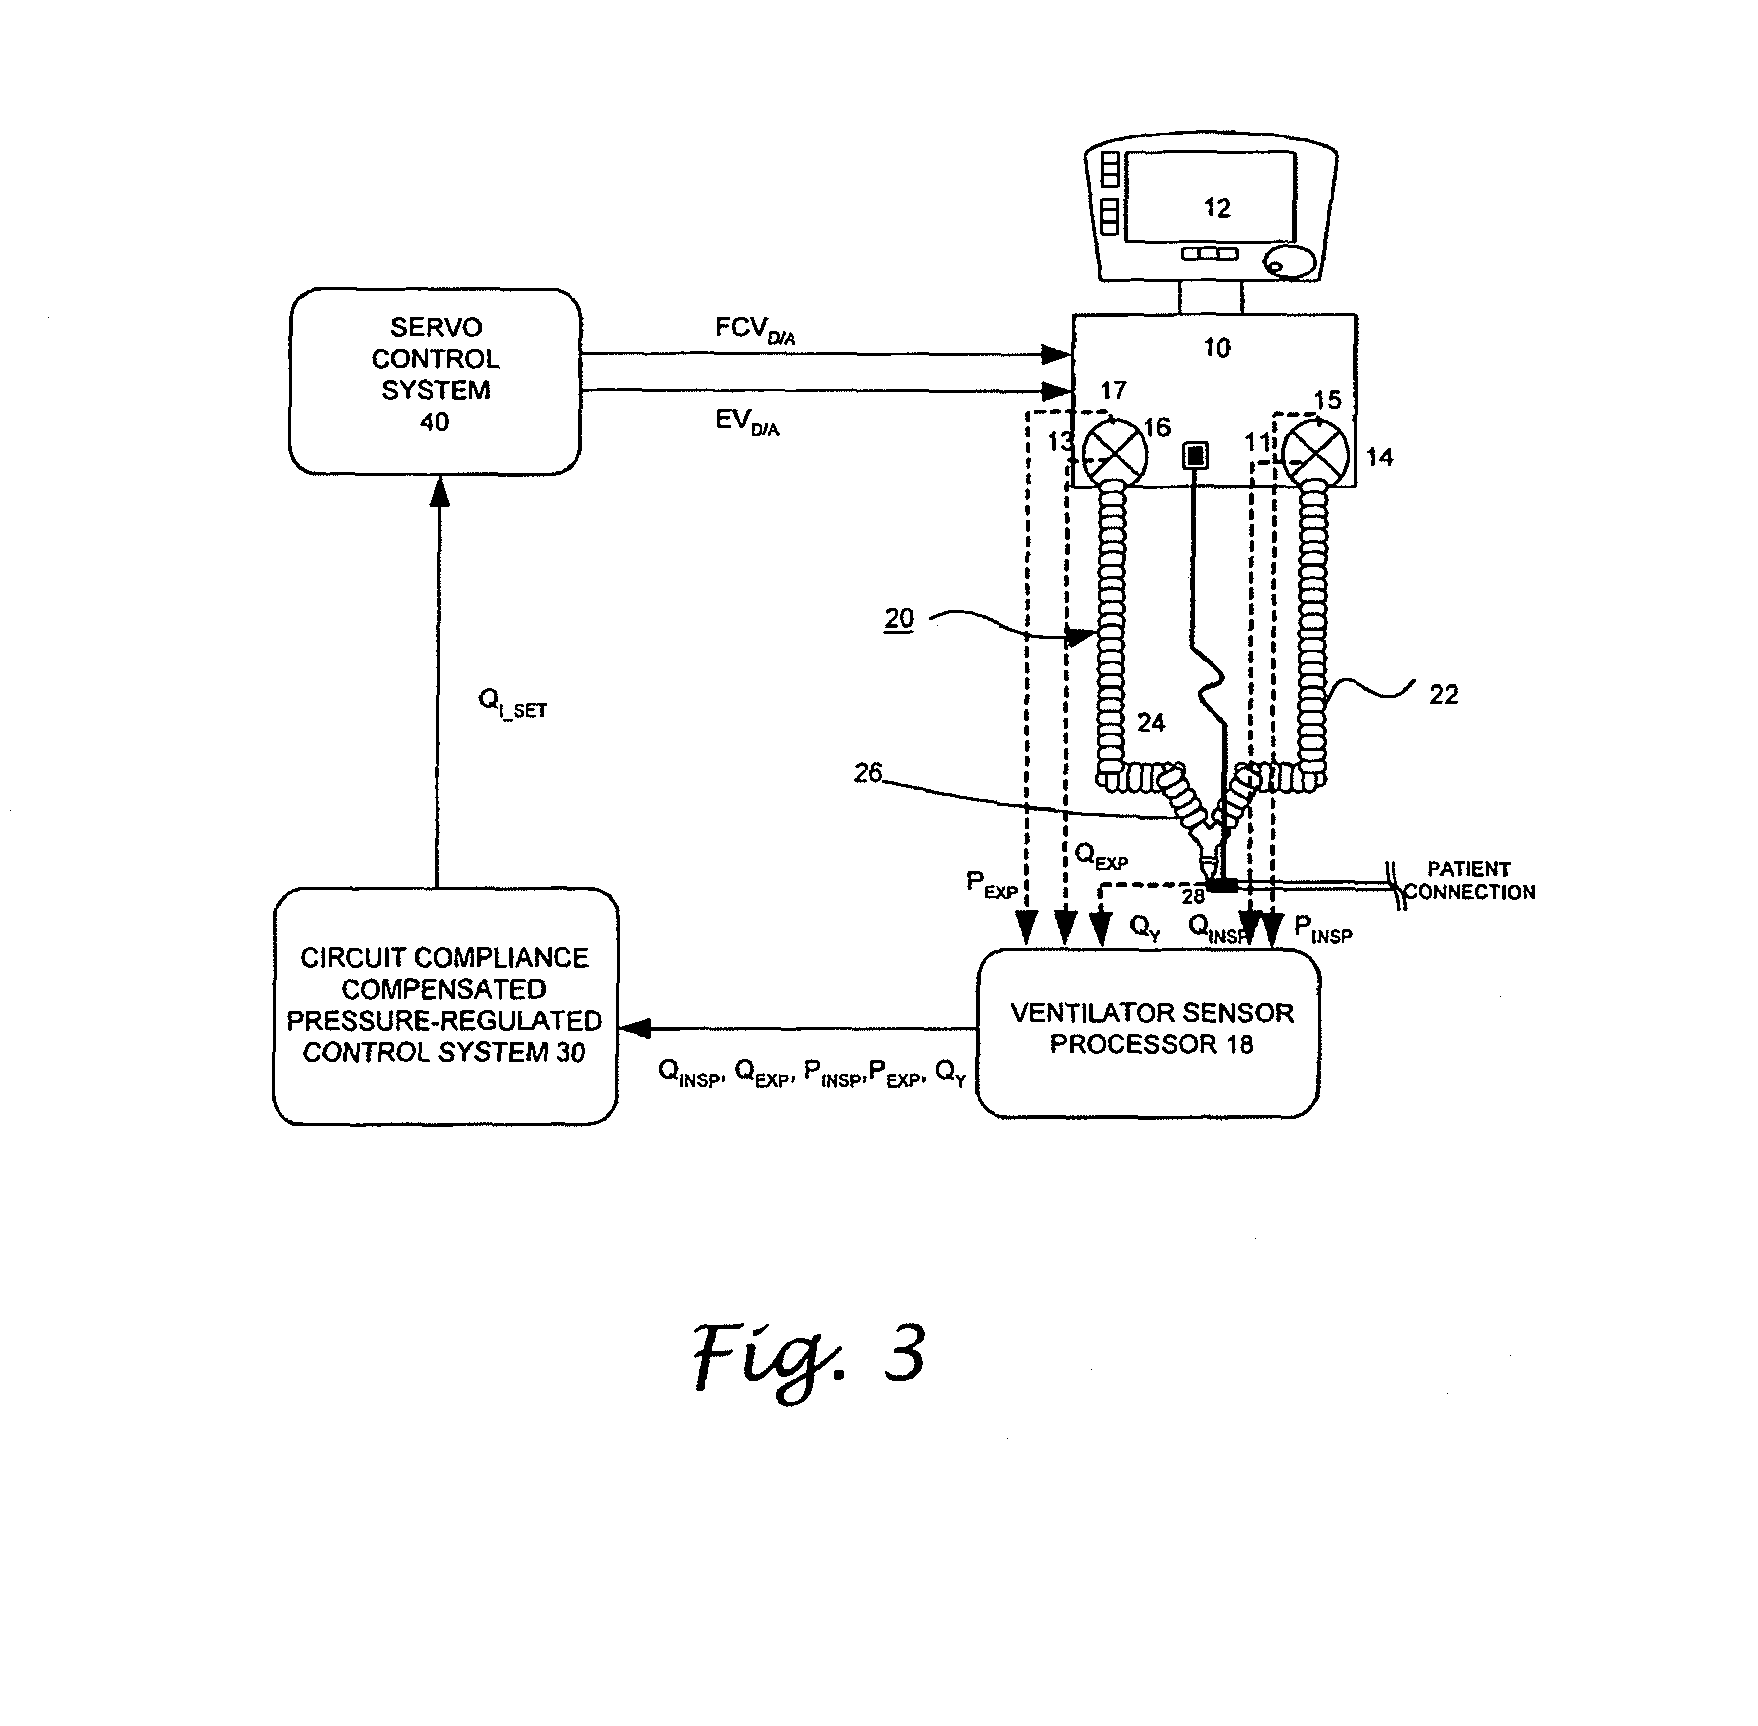 System and method for circuit compliance compensated pressure-regulated volume control in a patient respiratory ventilator